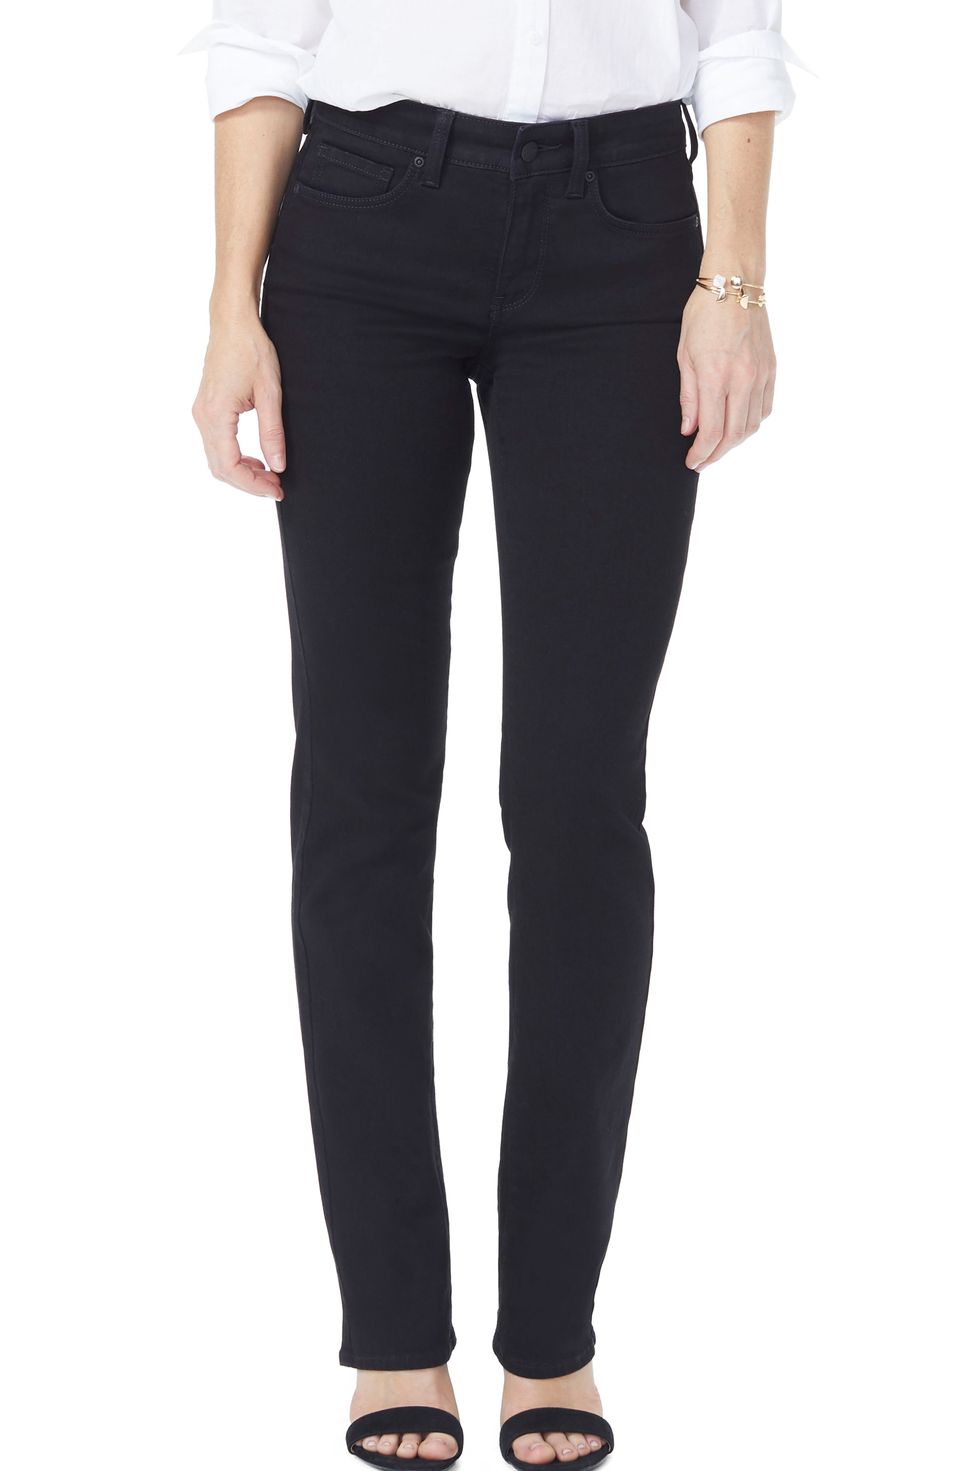 NYDJ Marilyn Straight Jeans Review - Size-Inclusive Denim Jeans